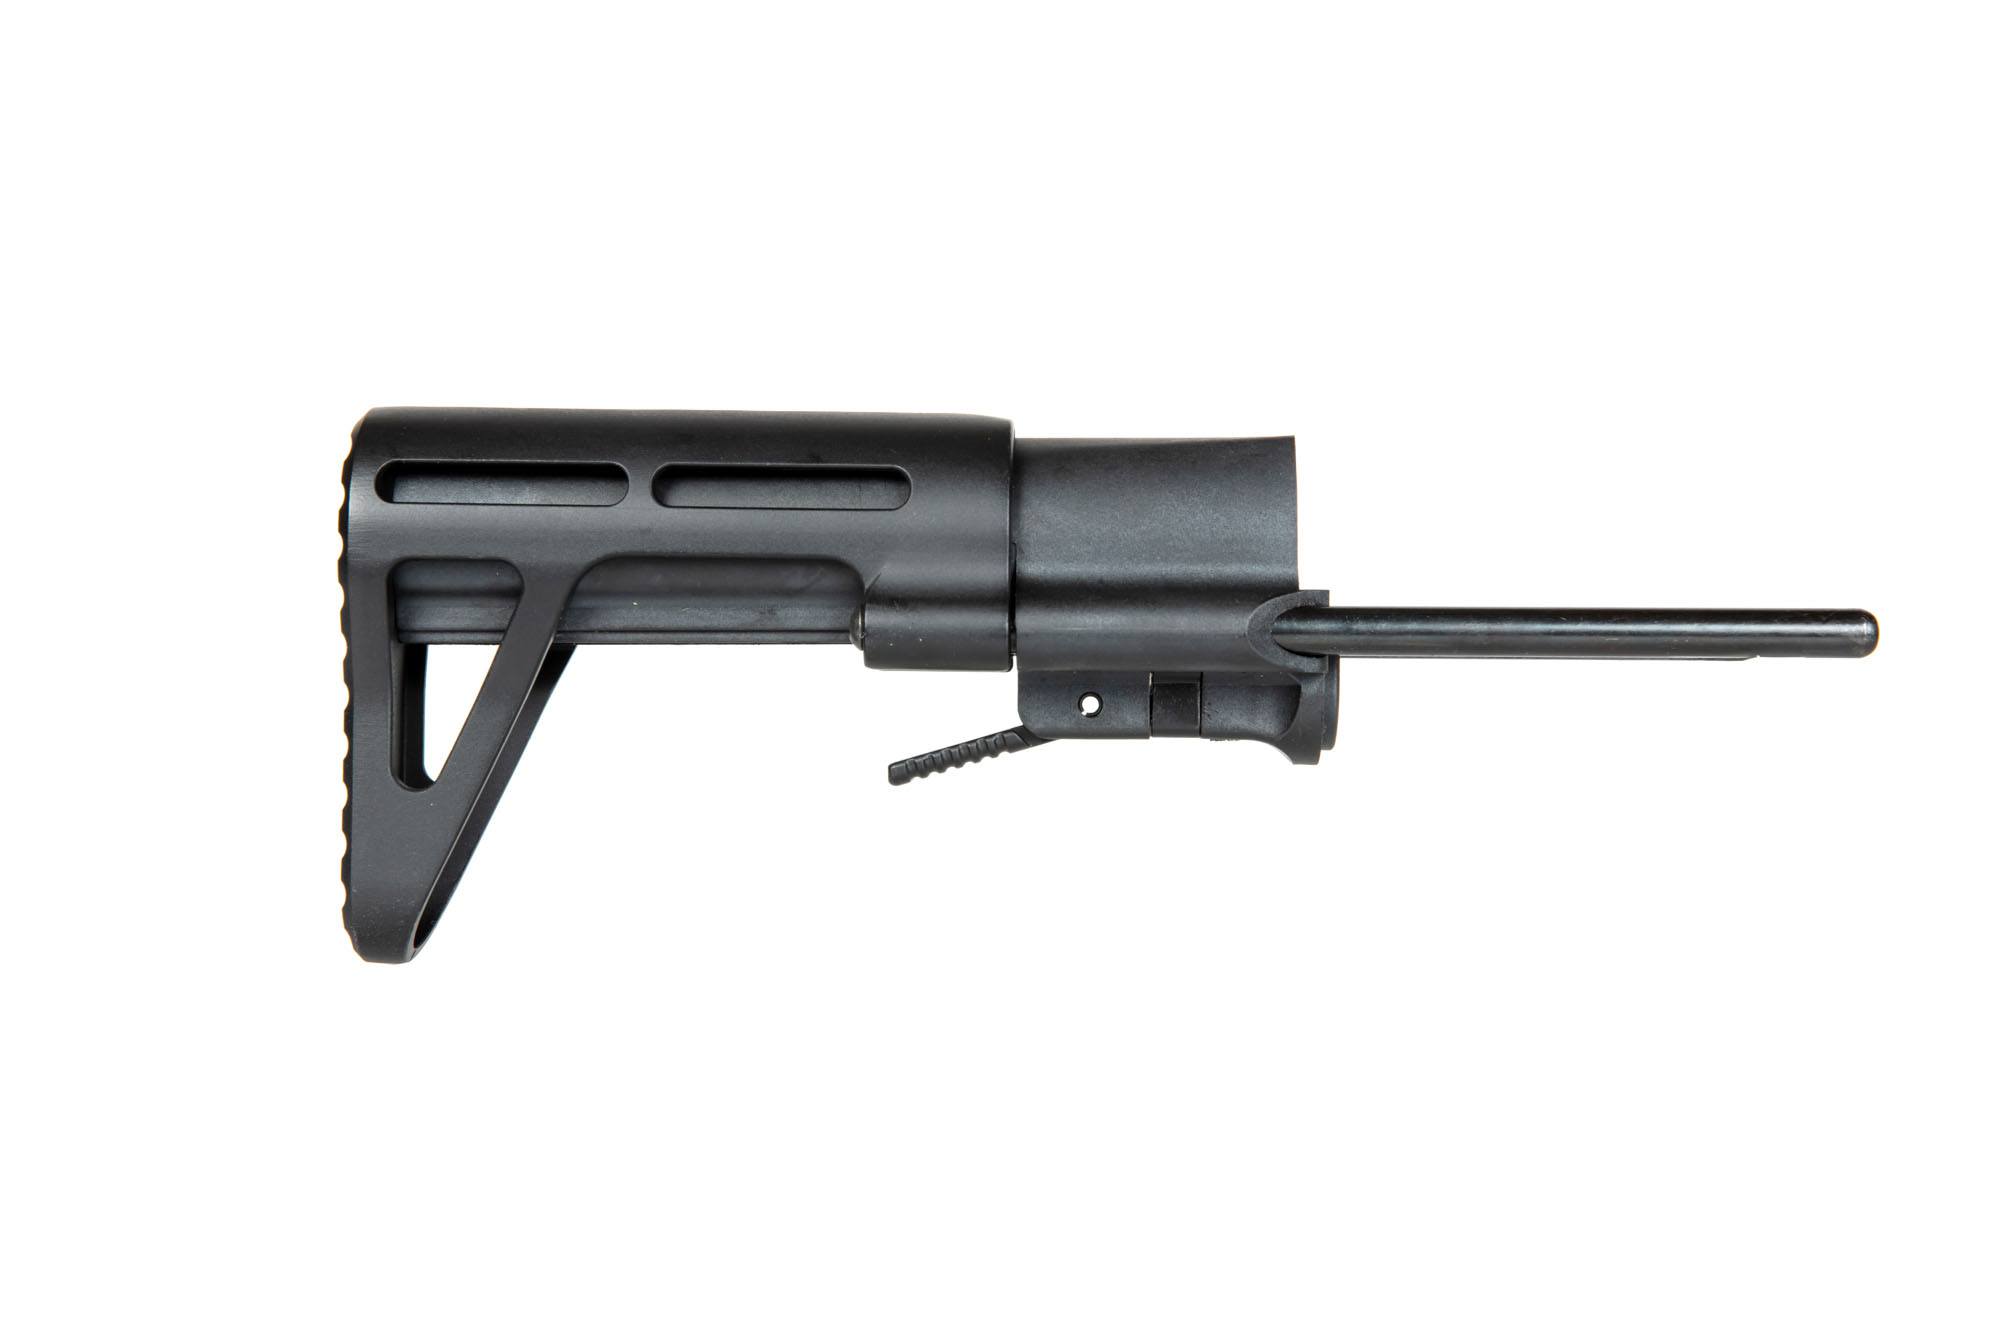 PDW-type stock for M4 / M16 airsoft rifles